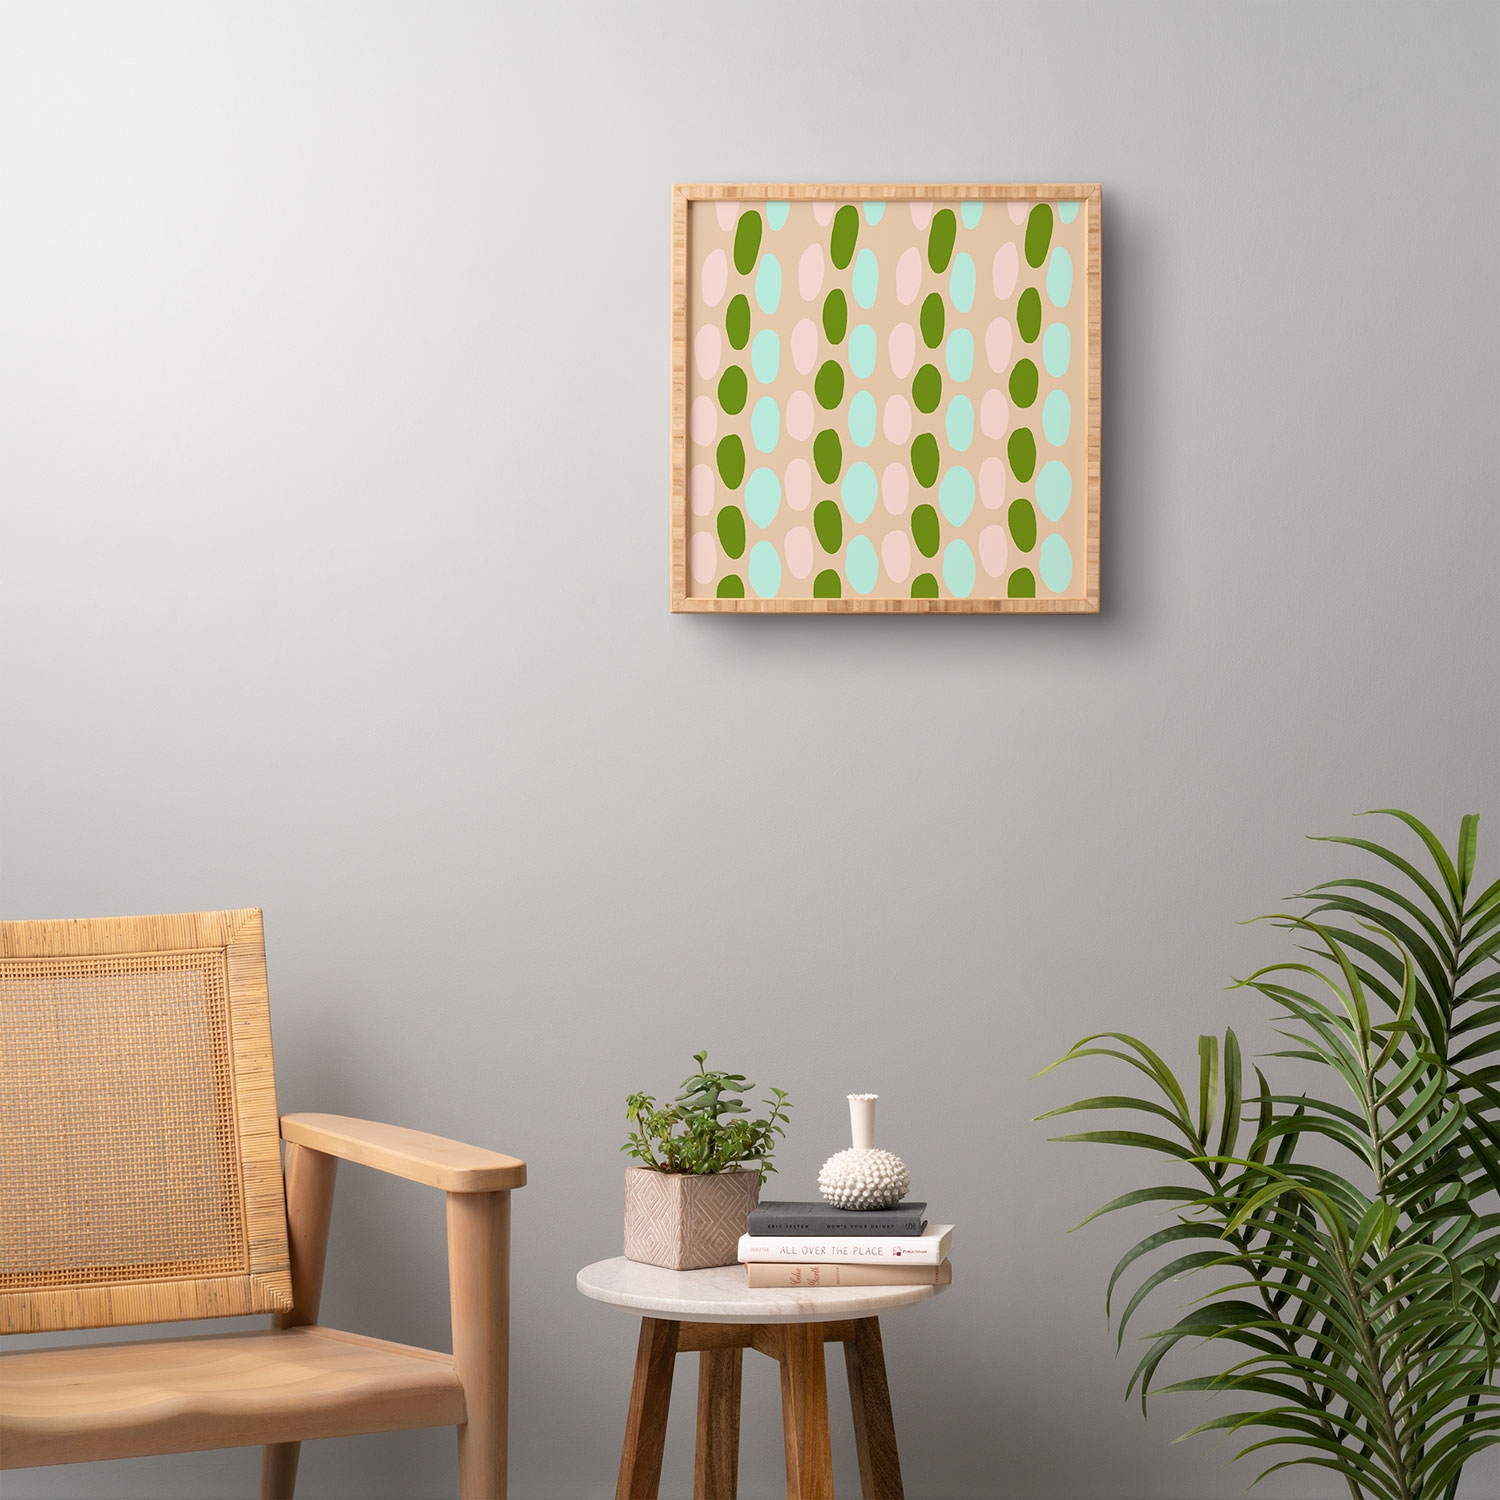 Jellybeans by SunshineCanteen - Framed Wall Art Bamboo 12" x 12" - Image 3